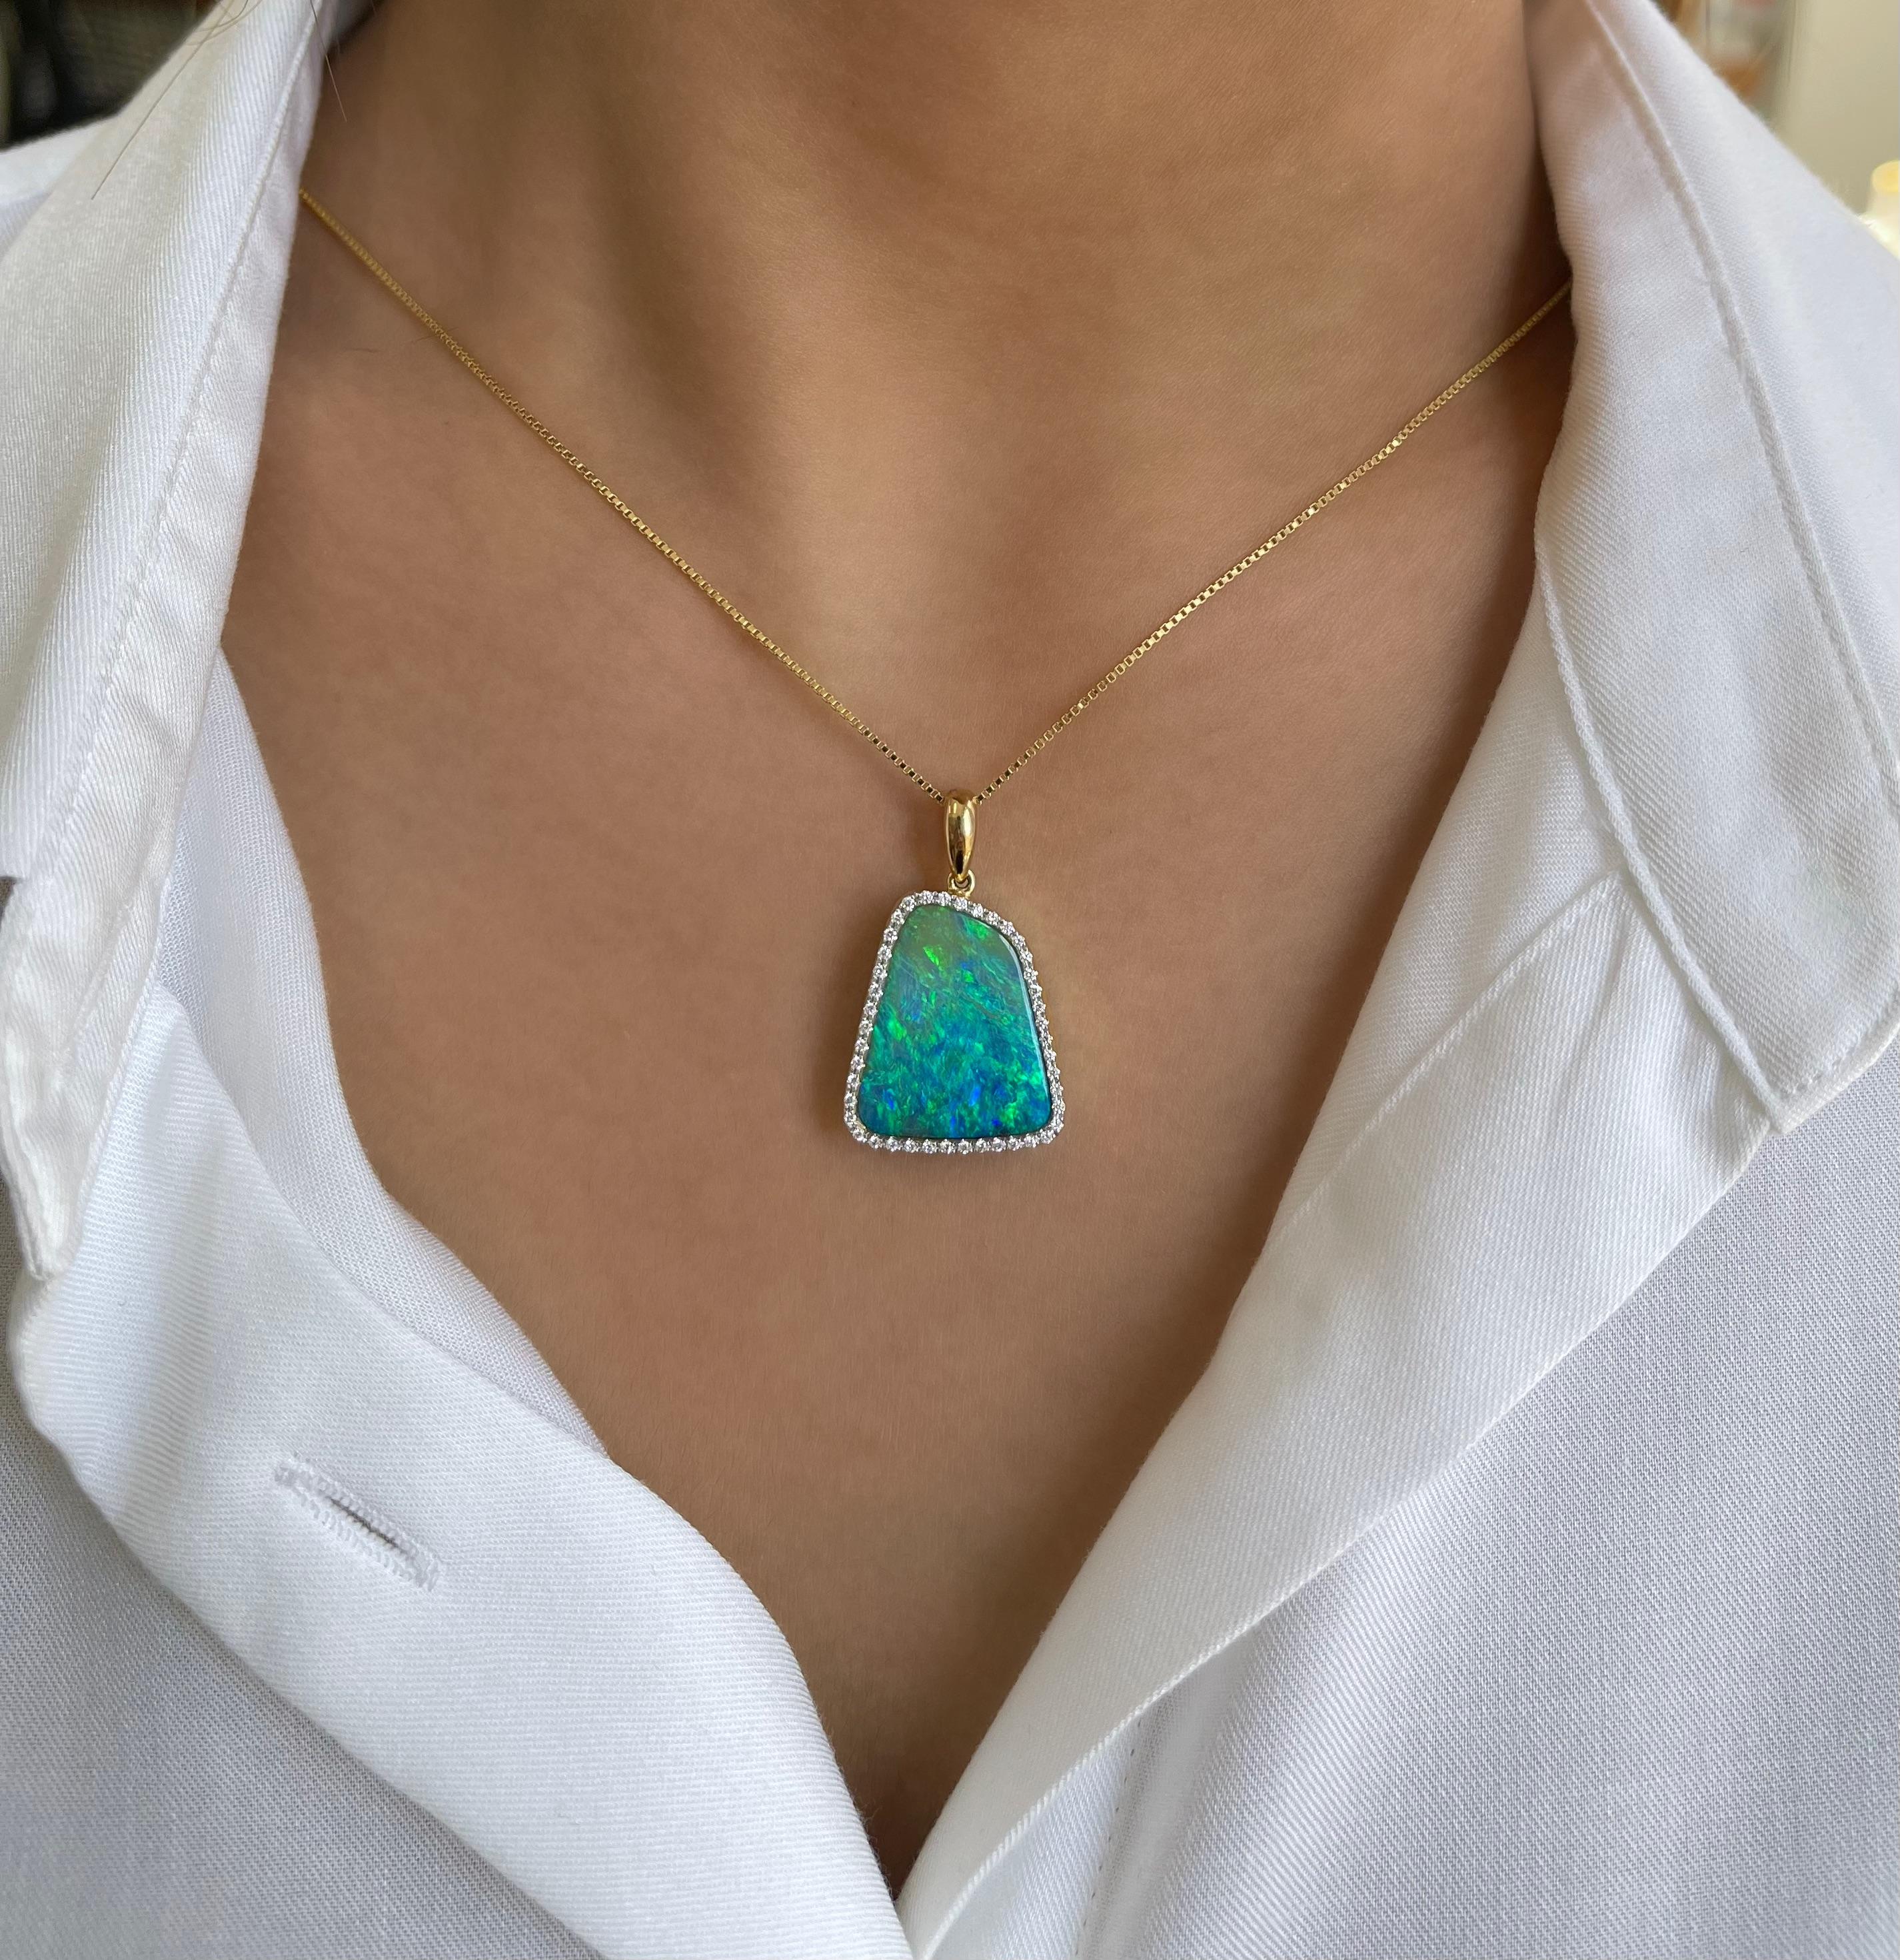 A romantic and glamorous statement piece the ‘Love Walked In’ opal pendant features an electrifying 16.30ct boulder opal hailing from Winton mines in Queensland, Australia. The attractive blue-green play-of-colour in this pendant holds endless